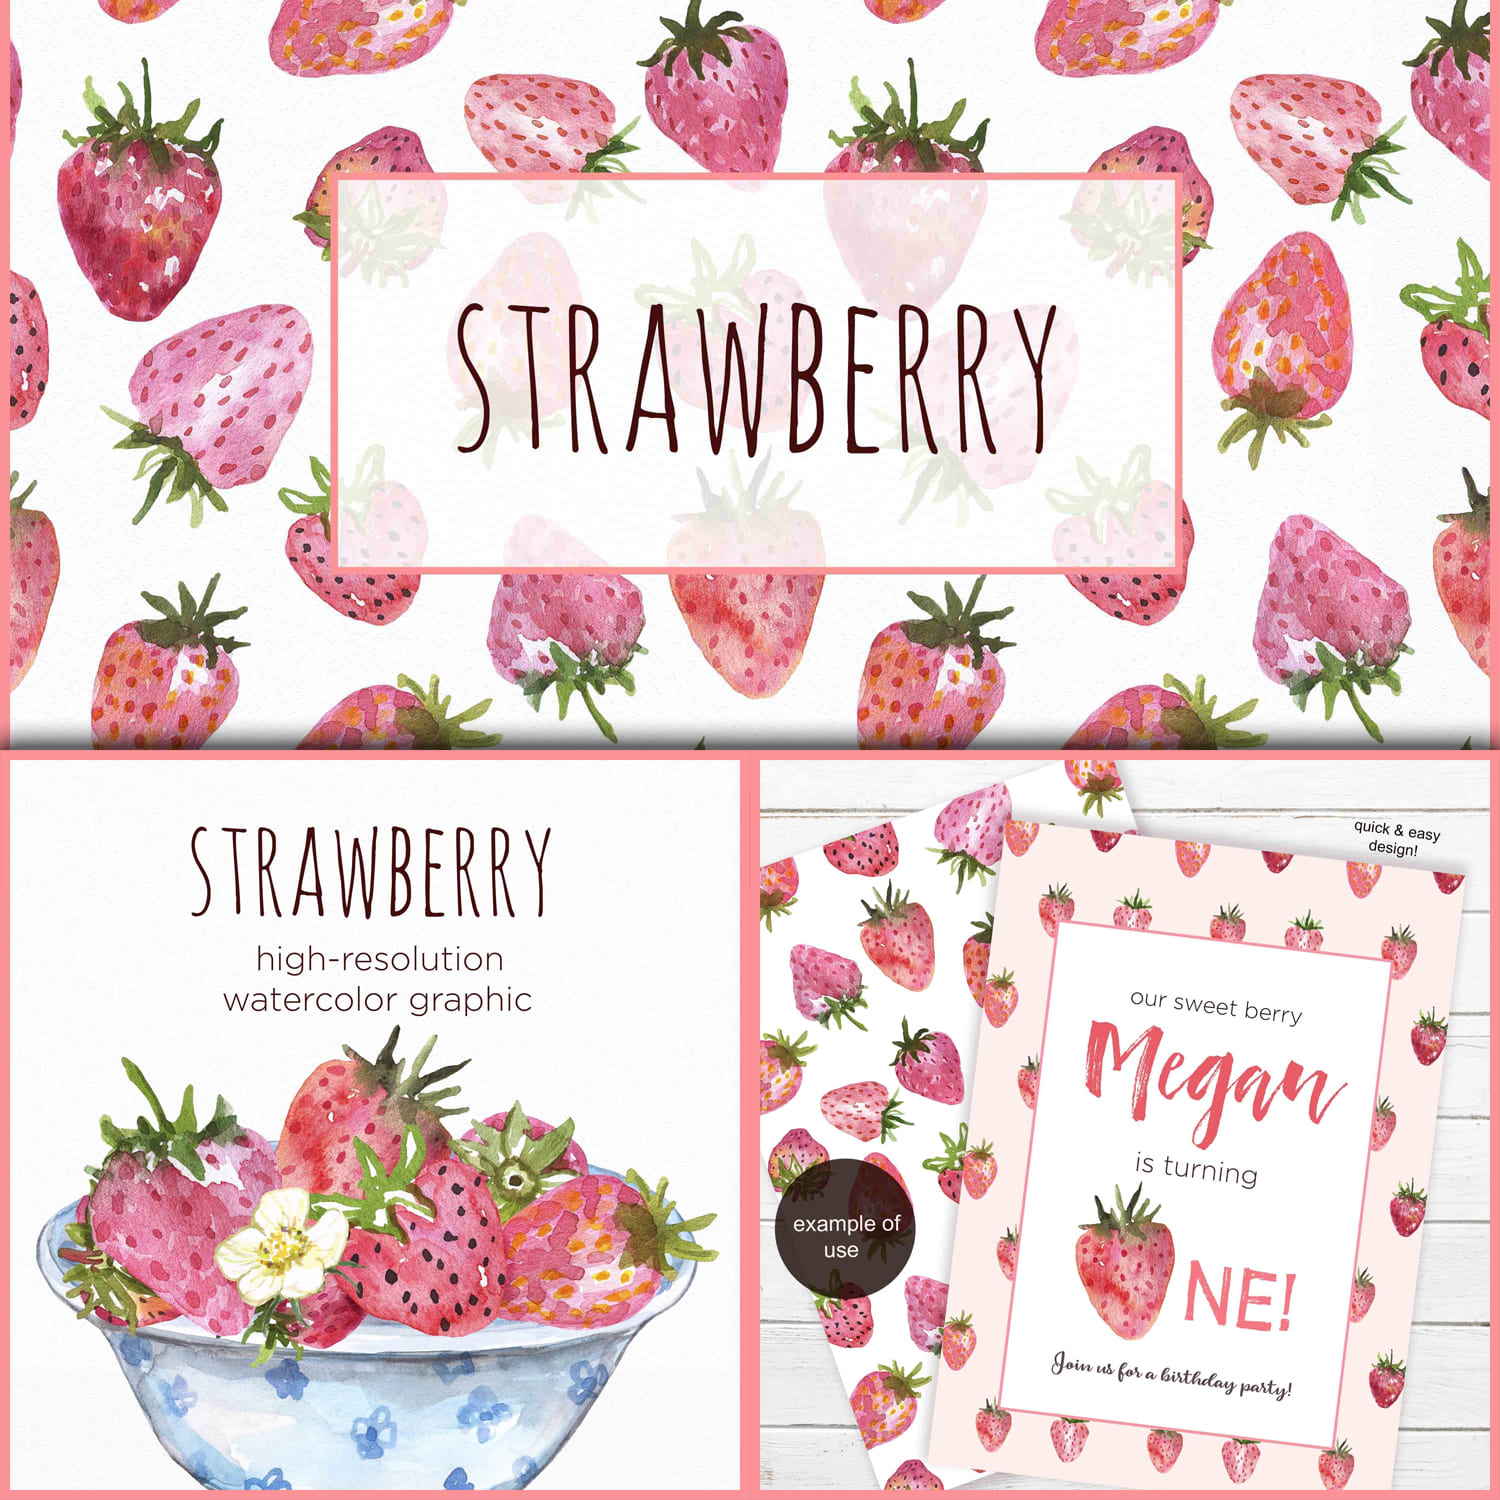 The use of a strawberry pattern and compositions with a watercolor image of strawberries.